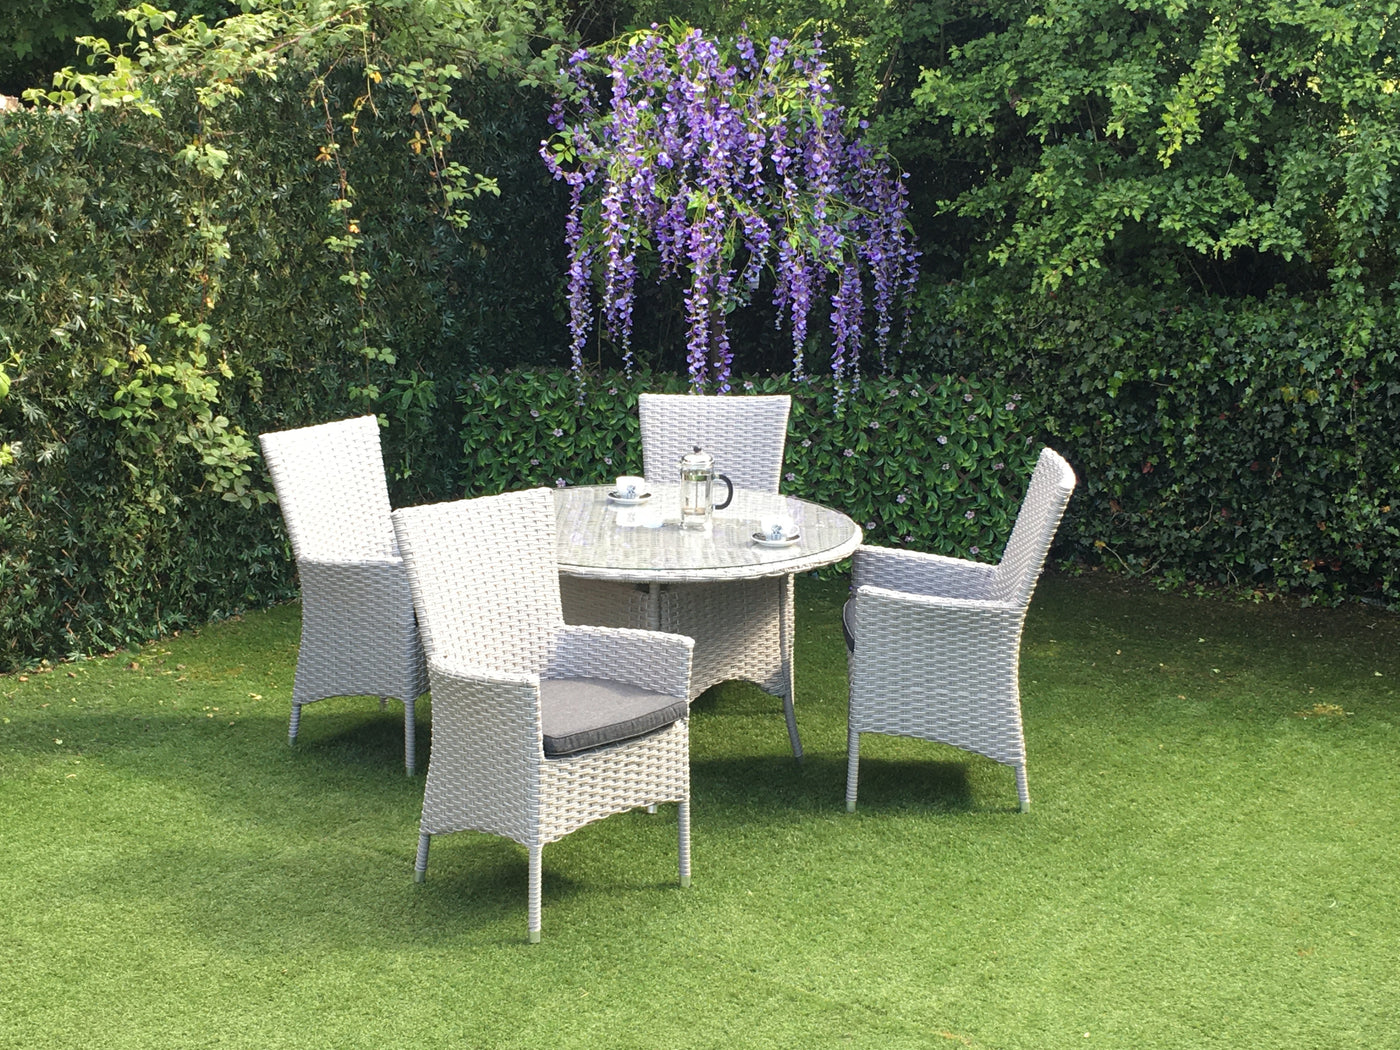 4 SEATER TABLE AND CHAIRS TEMPERED GLASS TABLE TOP WITH DOUBLE FLAT WEAVE - OUTDOOR FURNITURE